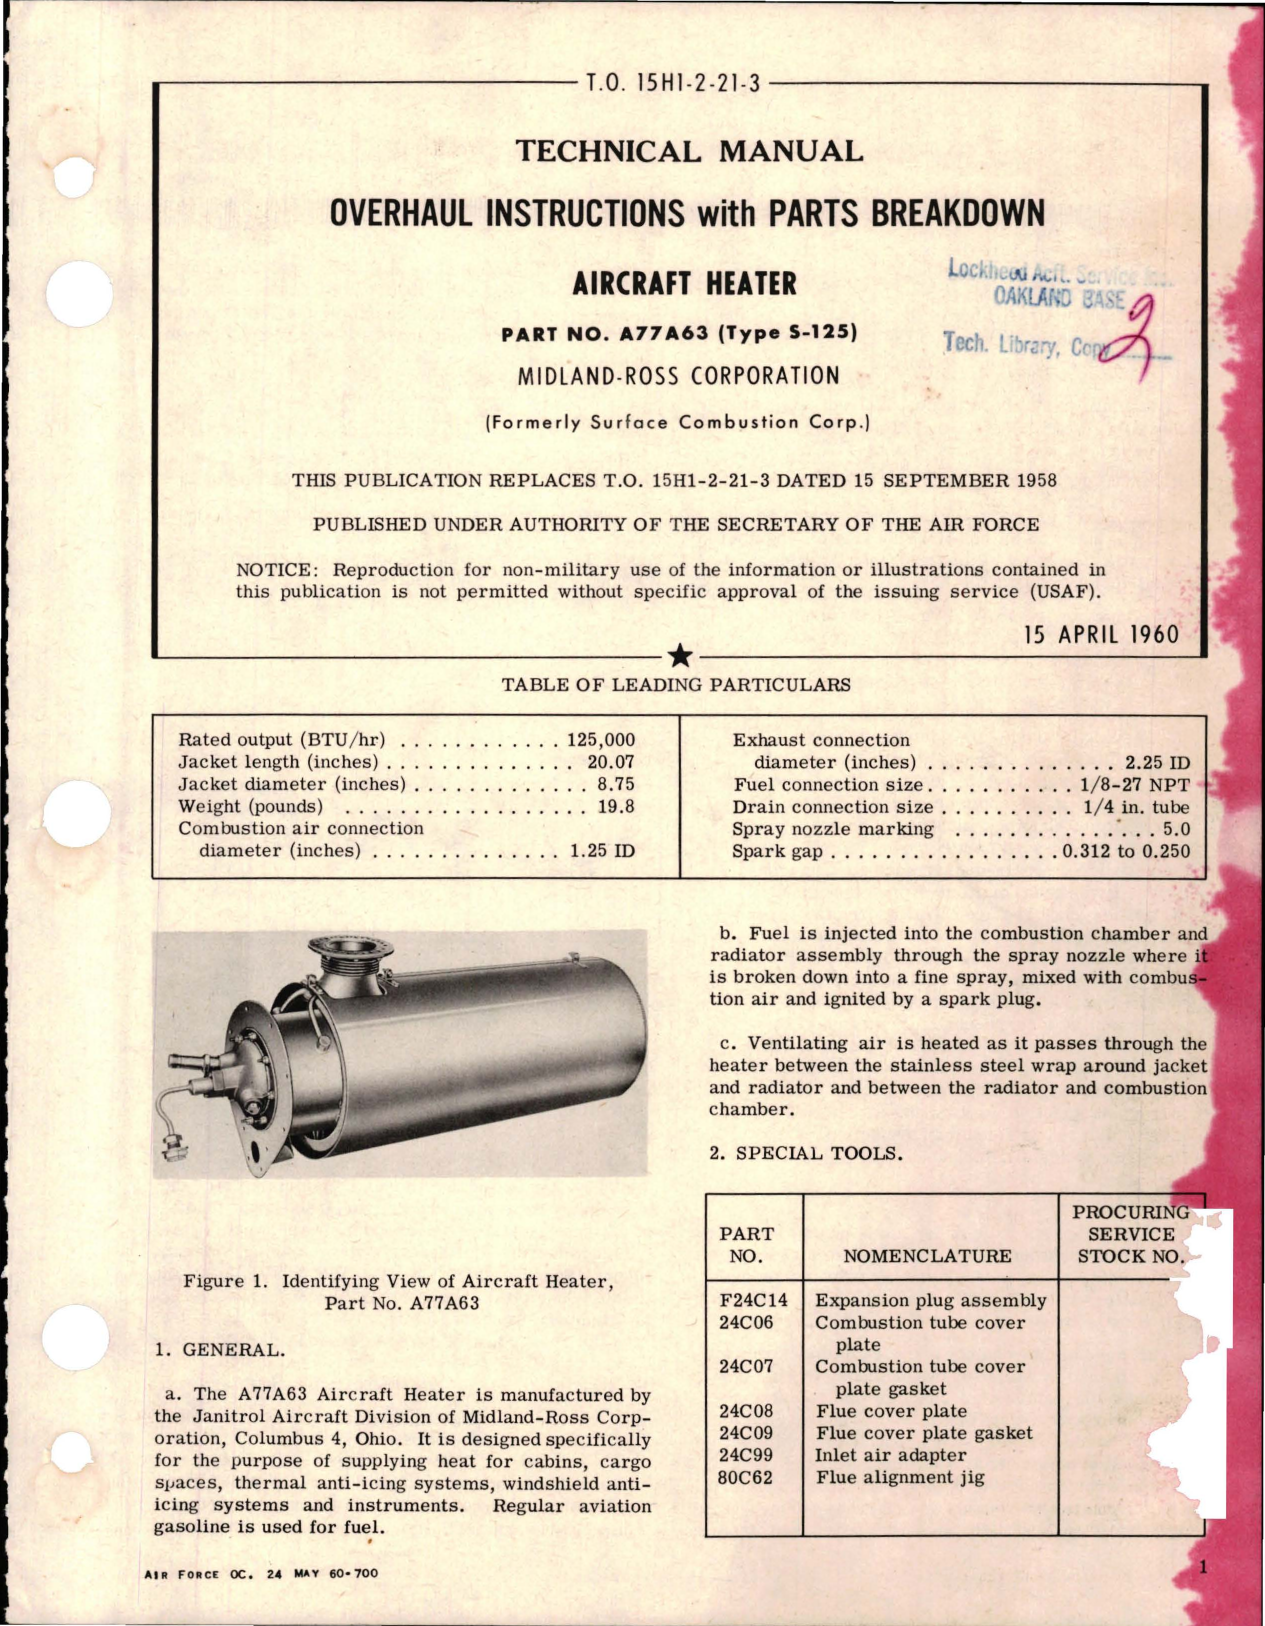 Sample page 1 from AirCorps Library document: Overhaul Instructions with Parts Breakdown for Aircraft Heater - Part A77A63 - Type S-125